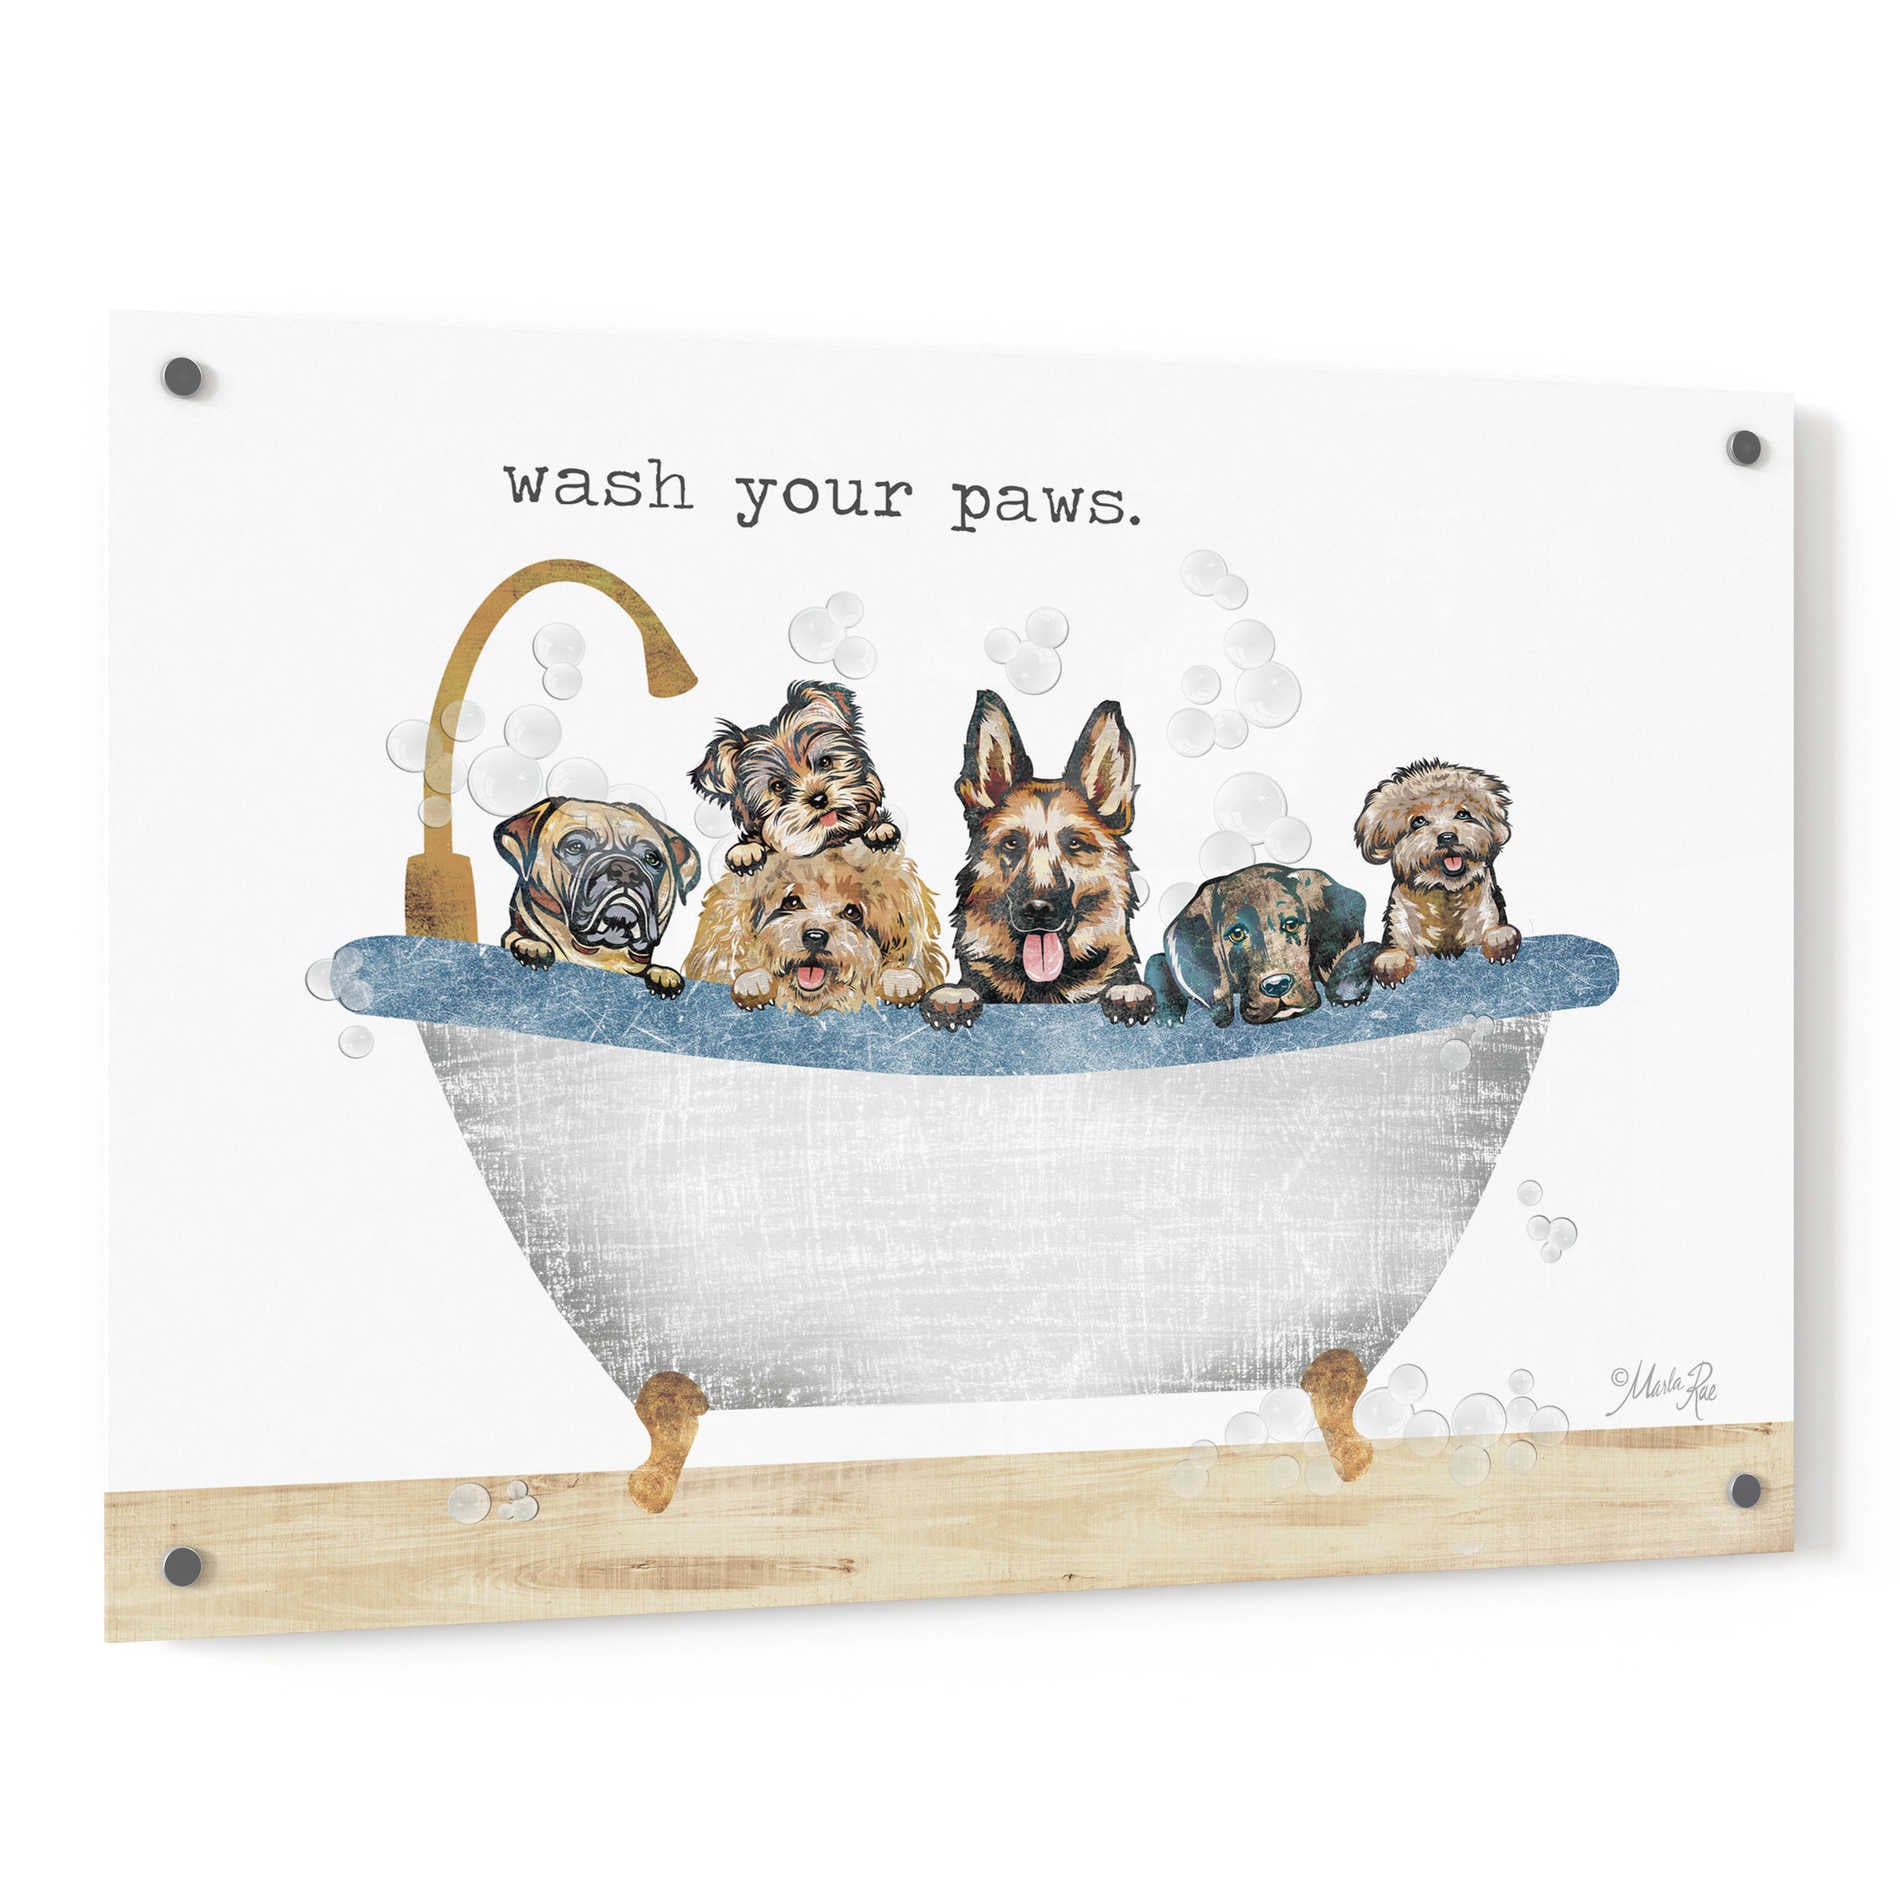 Epic Art 'Wash Your Paws' by Marla Rae, Acrylic Glass Wall Art,36x24